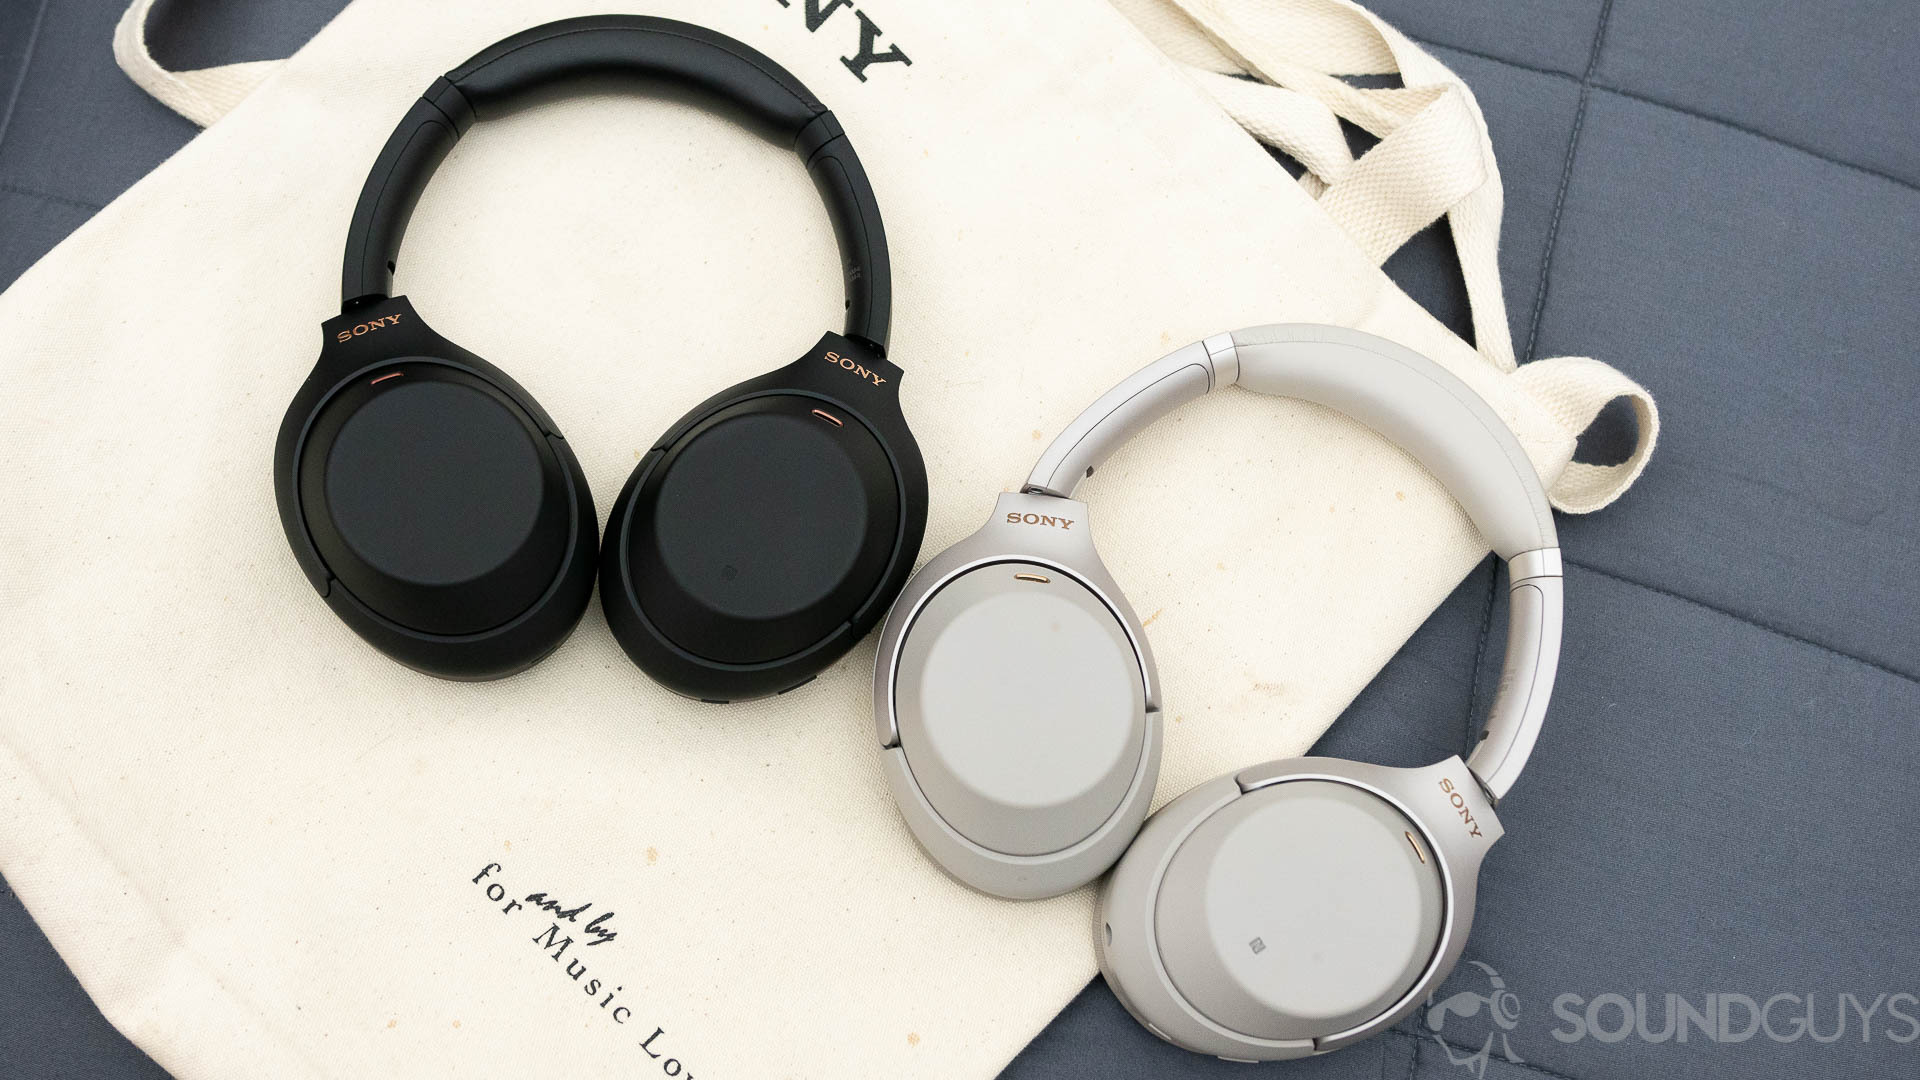 Sony's WH-1000XM4 headphones are great — here's how I made them sound even  better